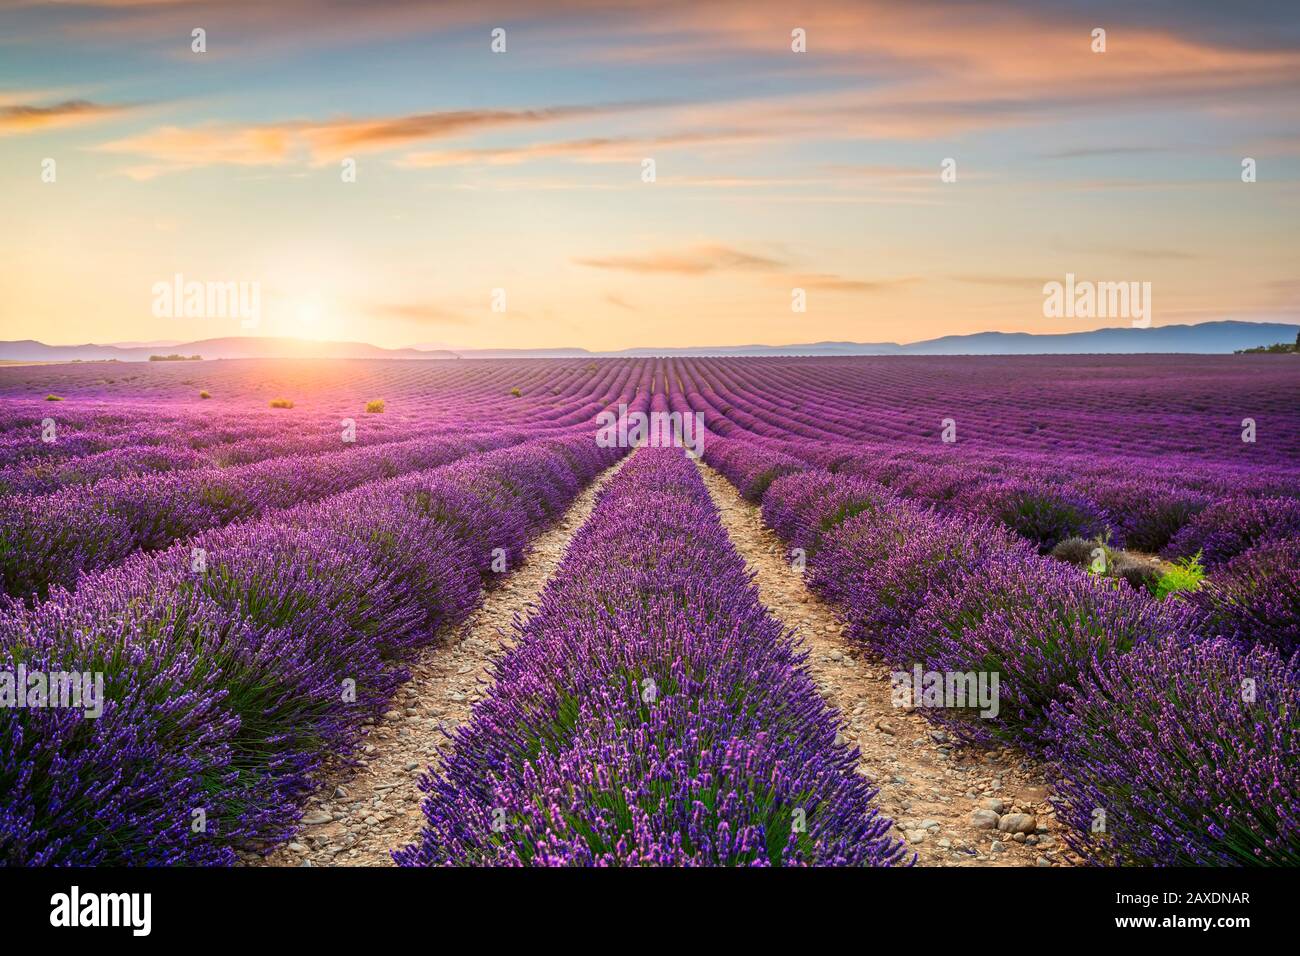 Lavender flowers blooming fields at sunset. Valensole, Provence, France, Europe. Stock Photo